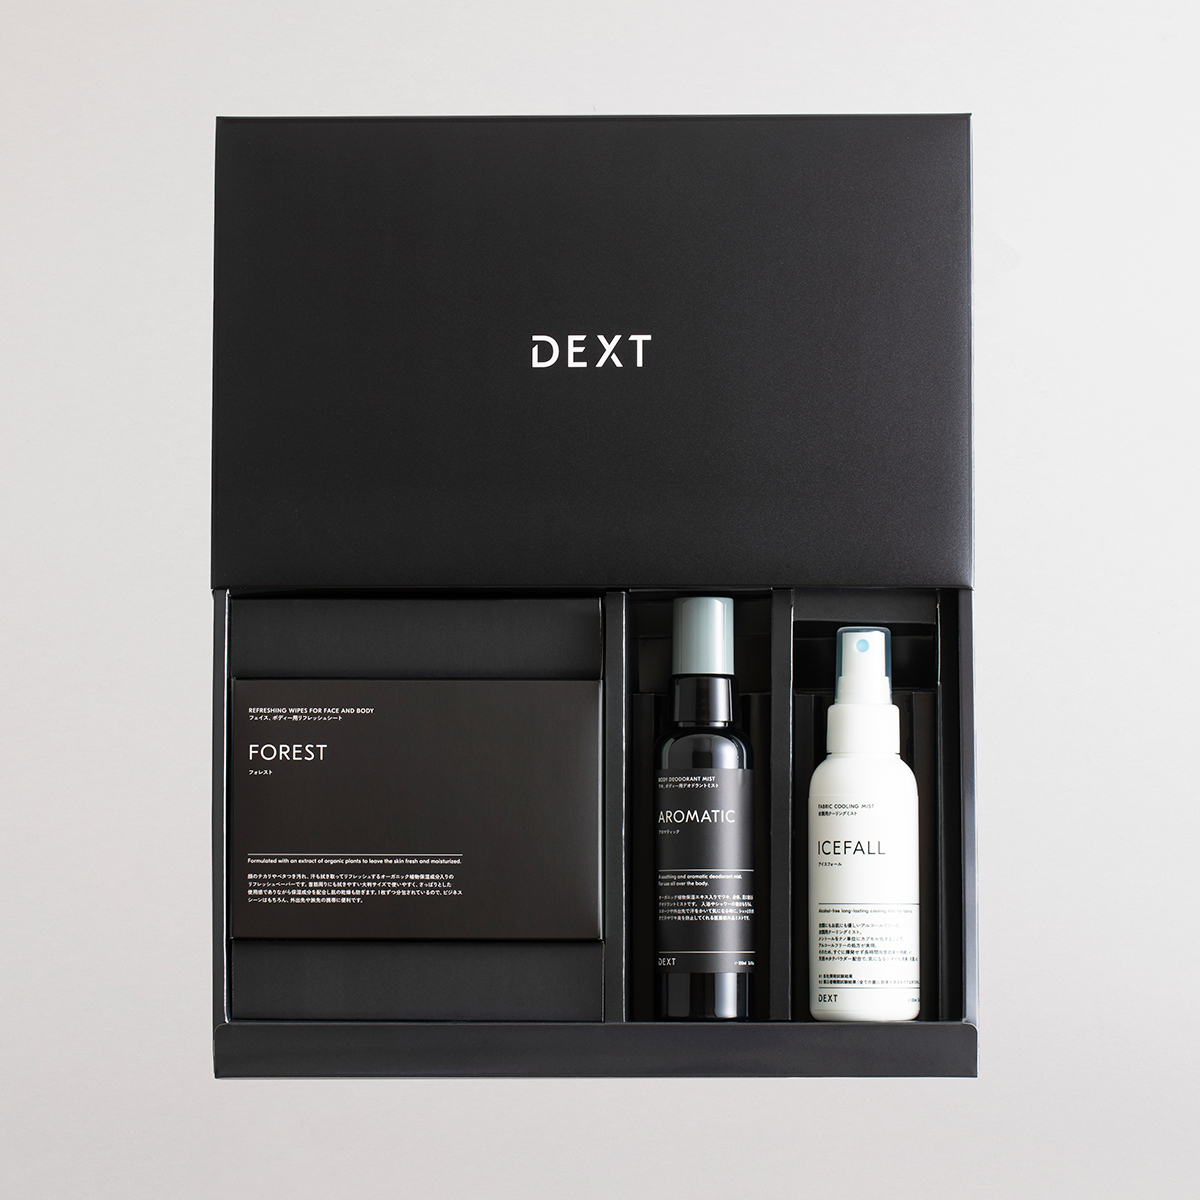 DEXT REFRESHING WIPES FOR FACE AND BODY (FOREST) & BODY DEODORANT MIST & FABRIC COOLING MIST